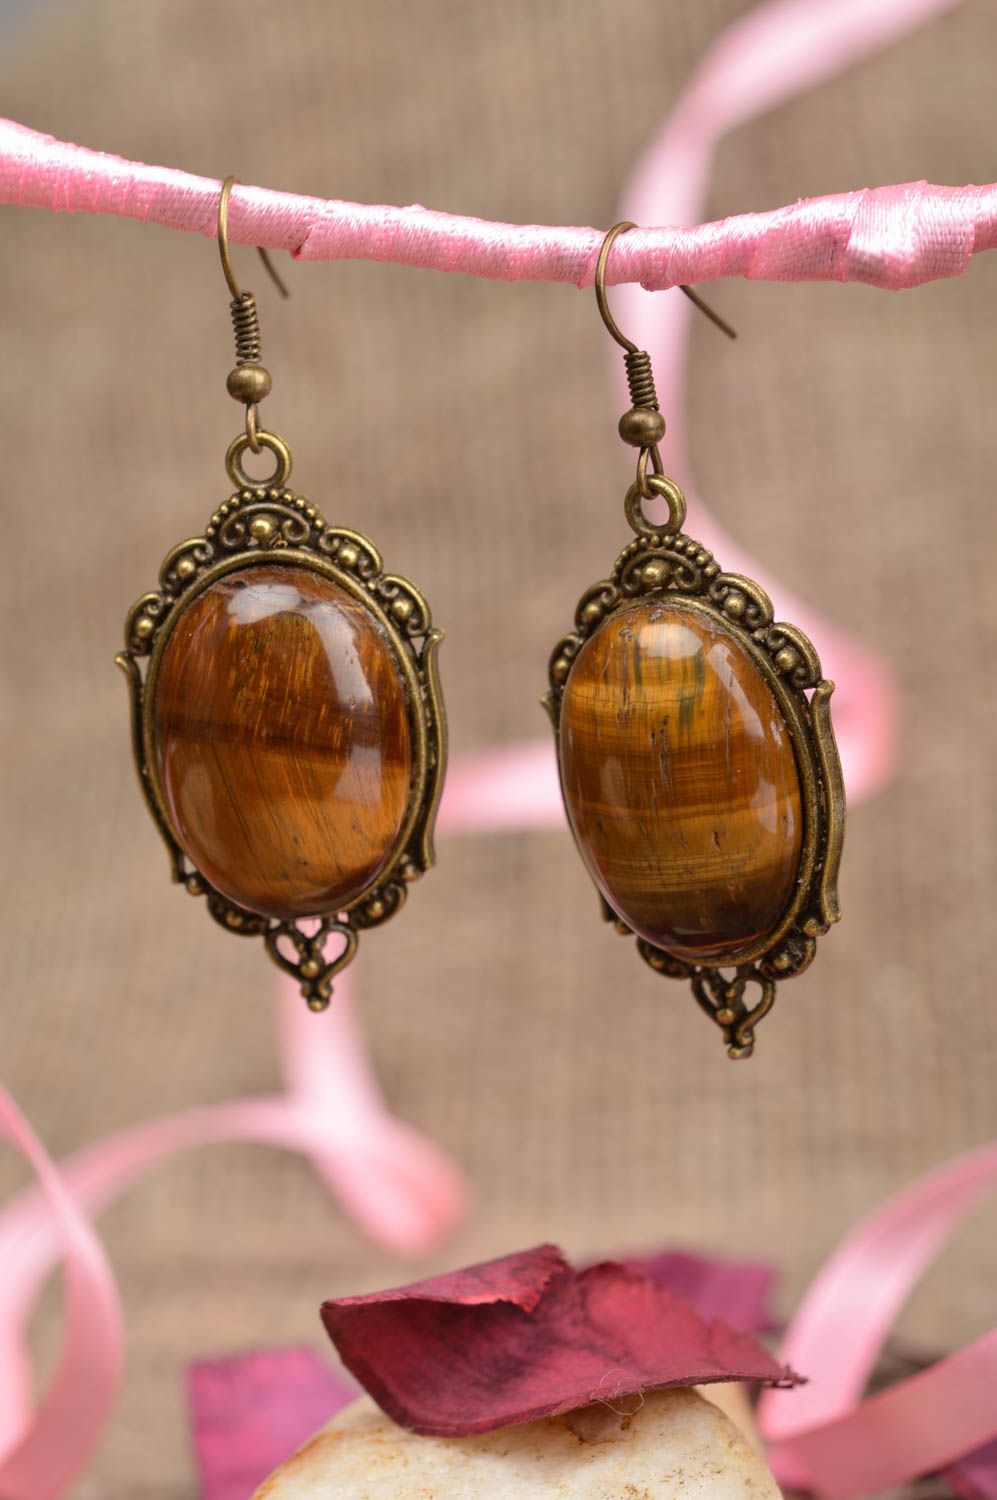 Handmade cute vintage metal earrings with cabochons made of brown stone photo 1